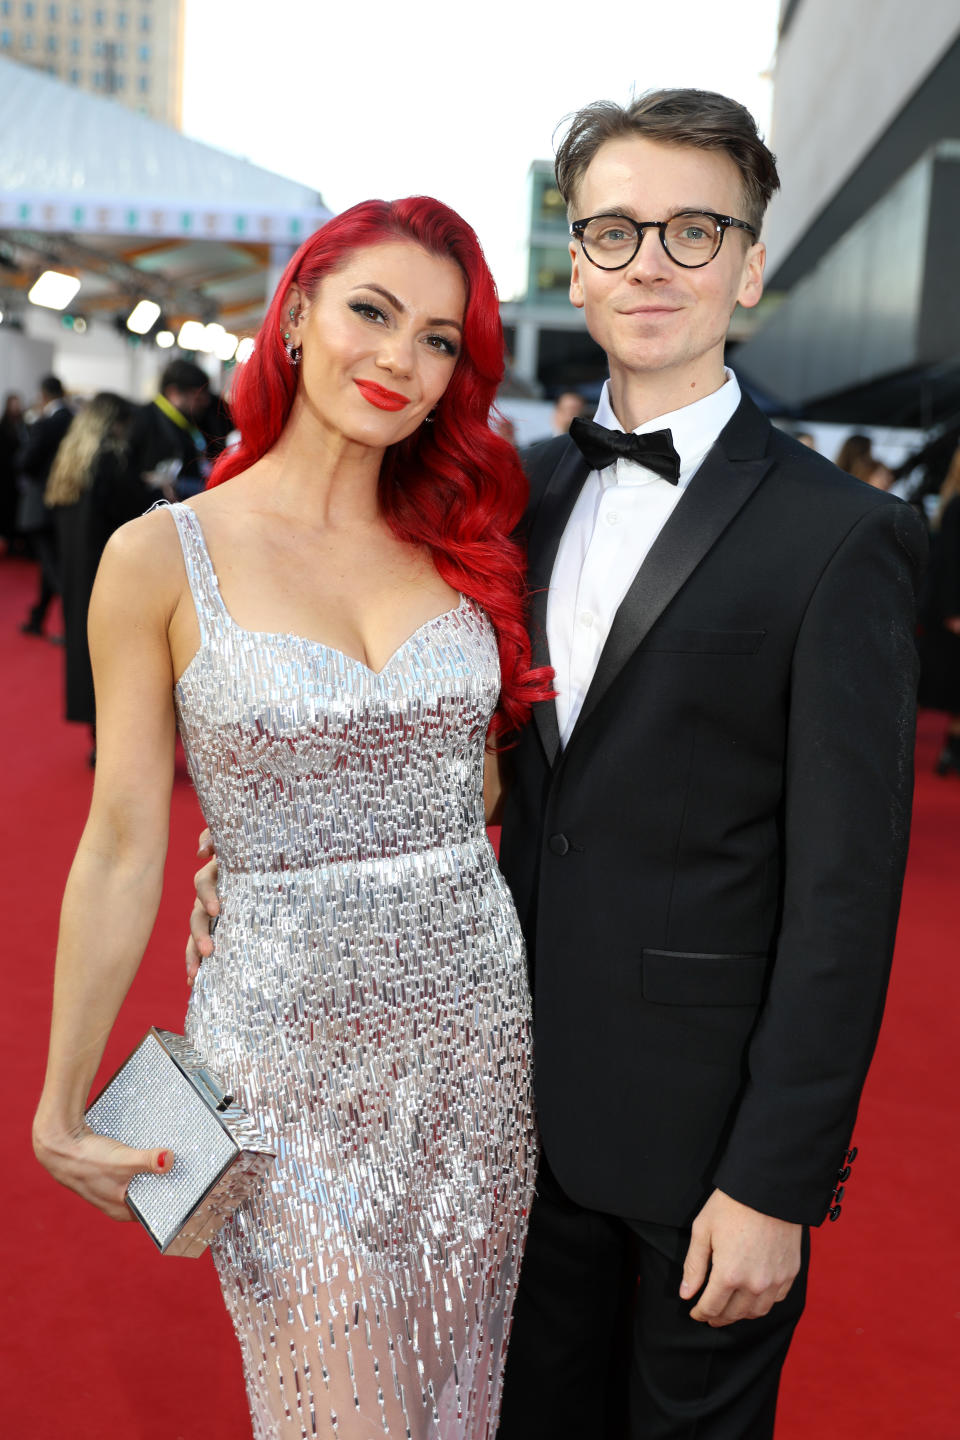 Dianne Buswell sparkles in sequins as she cuddles up to Joe Sugg